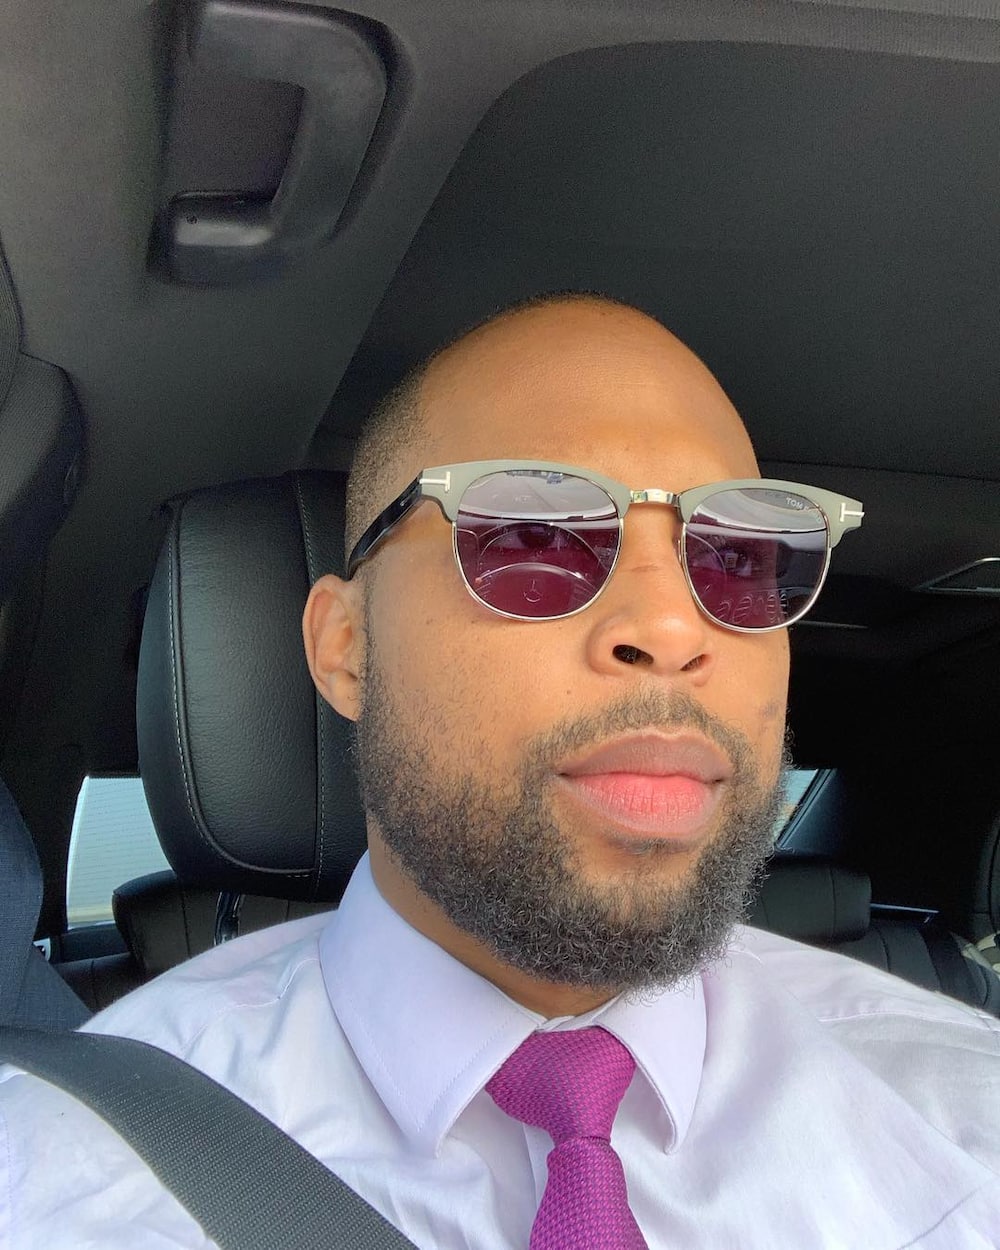 Sizwe Dhlomo biography: age, education, Forex, cars, and Instagram